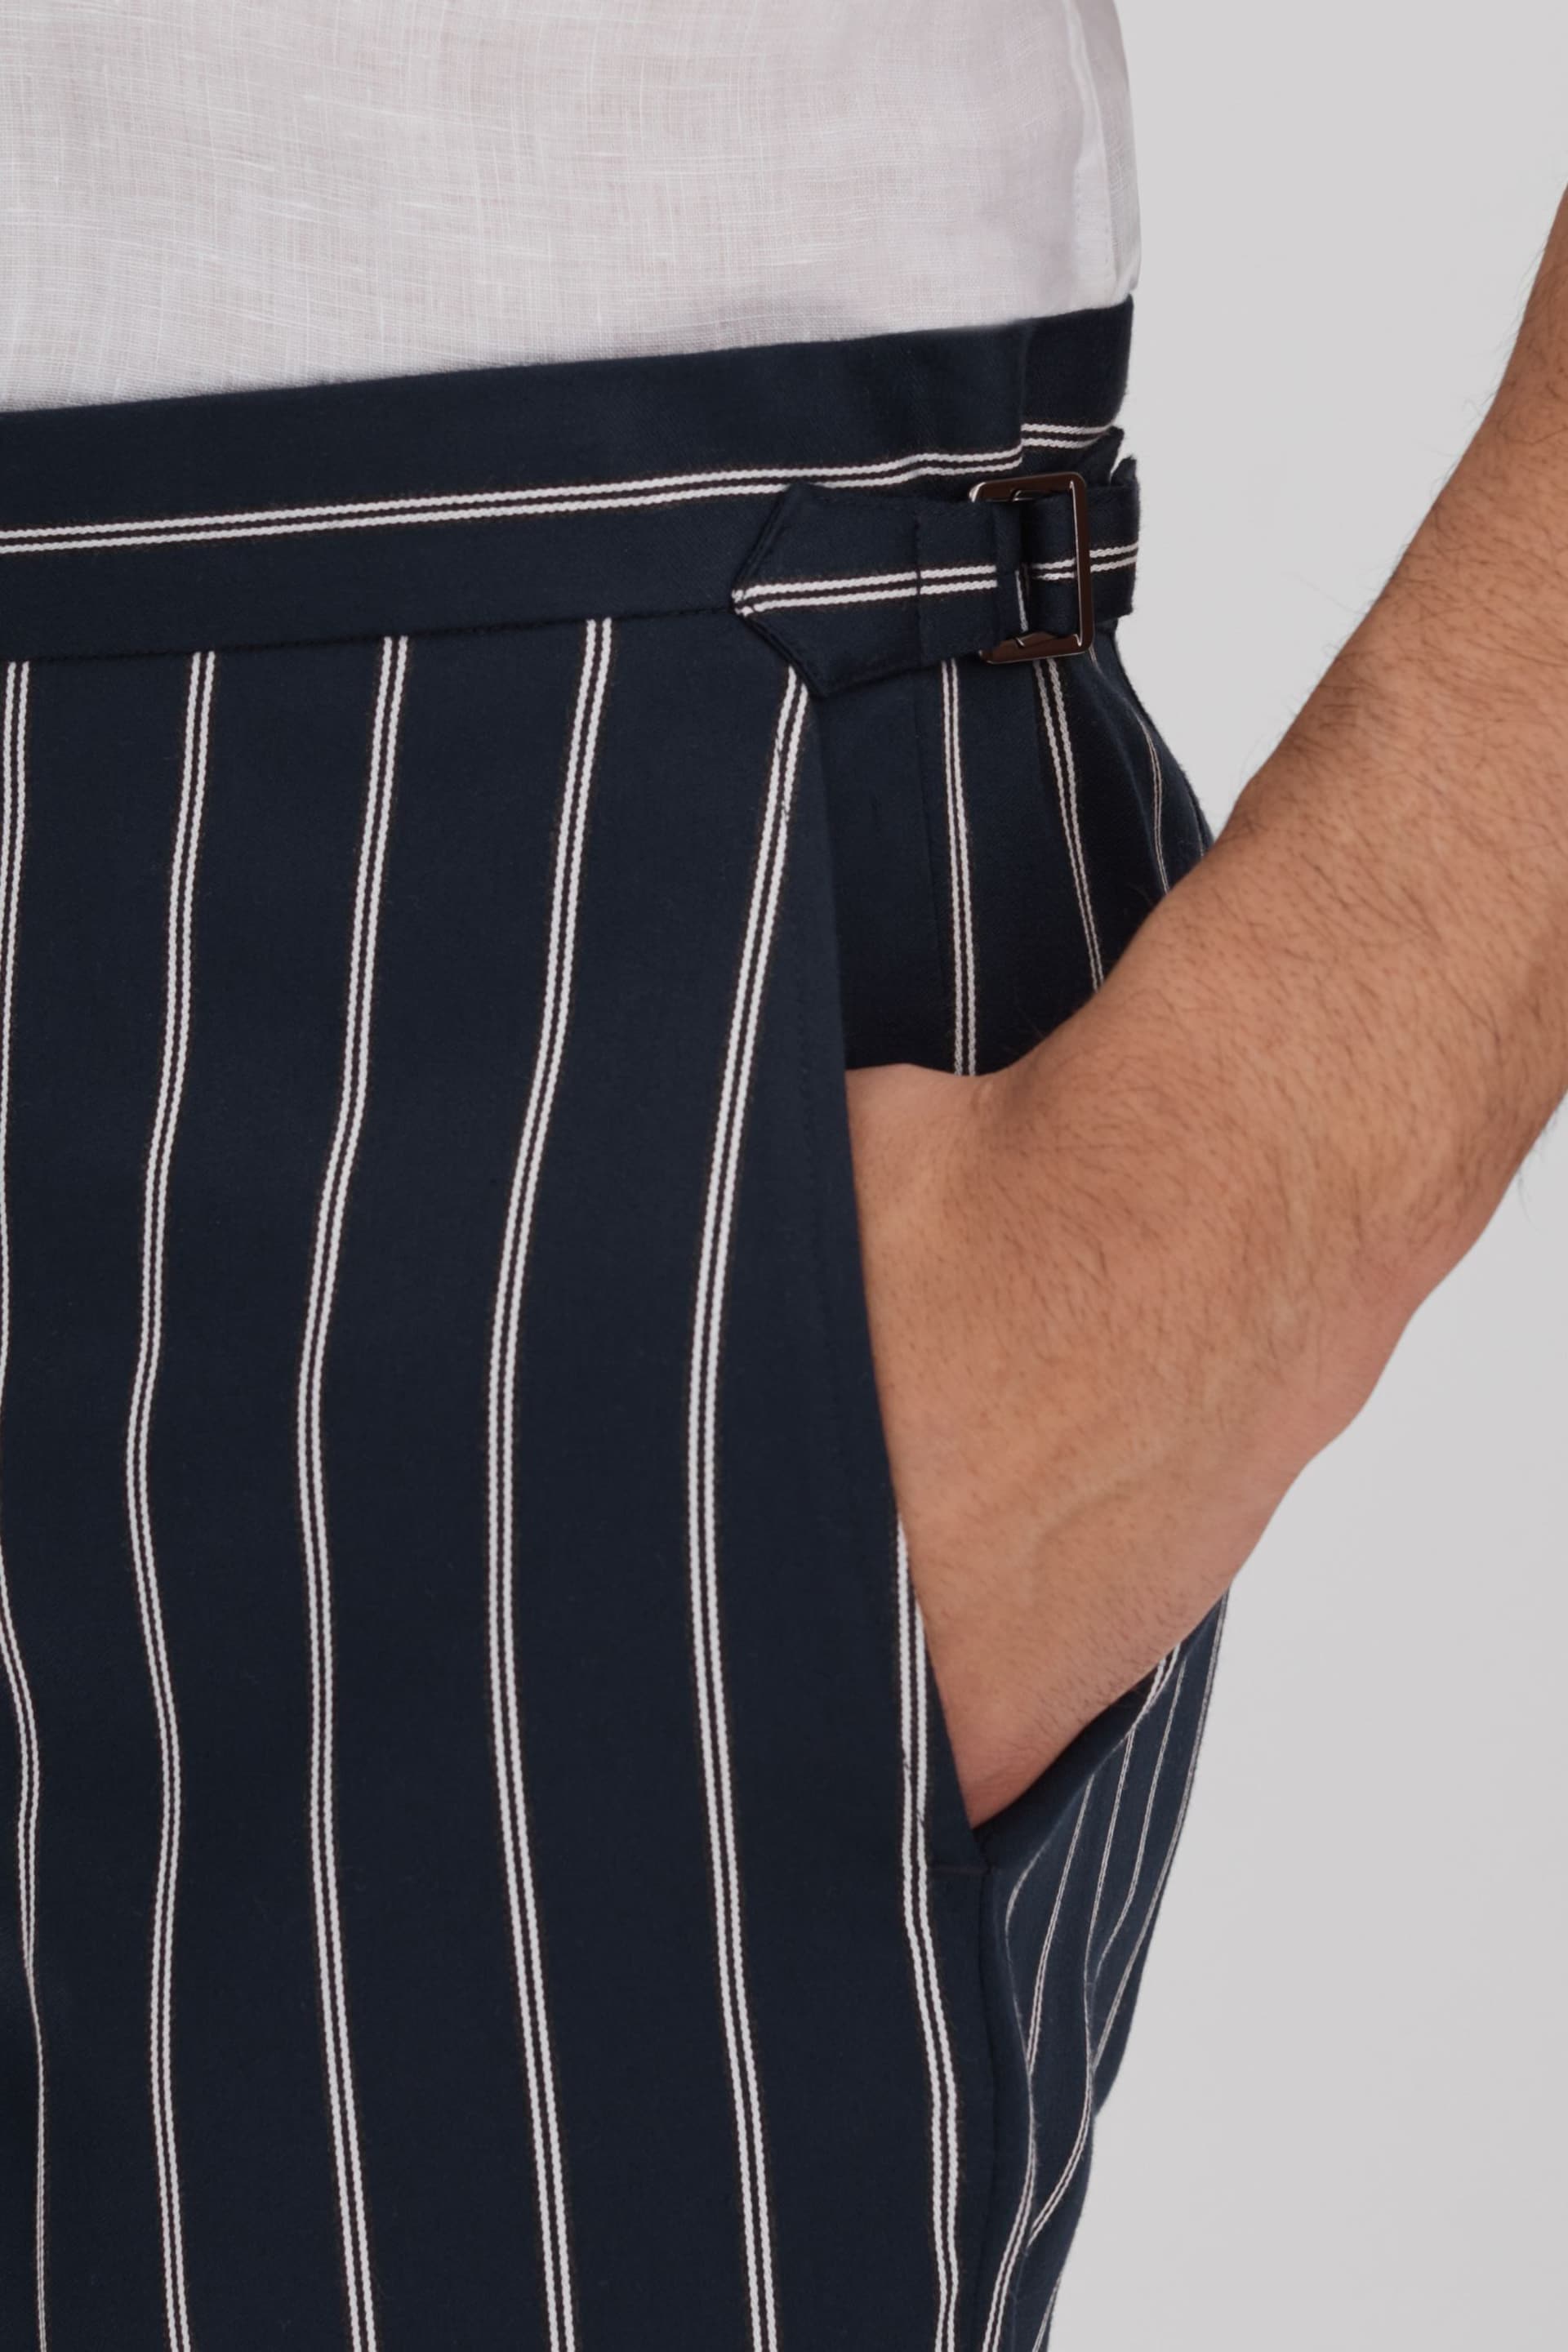 Reiss Navy/White Lake Striped Side Adjuster Shorts - Image 5 of 6